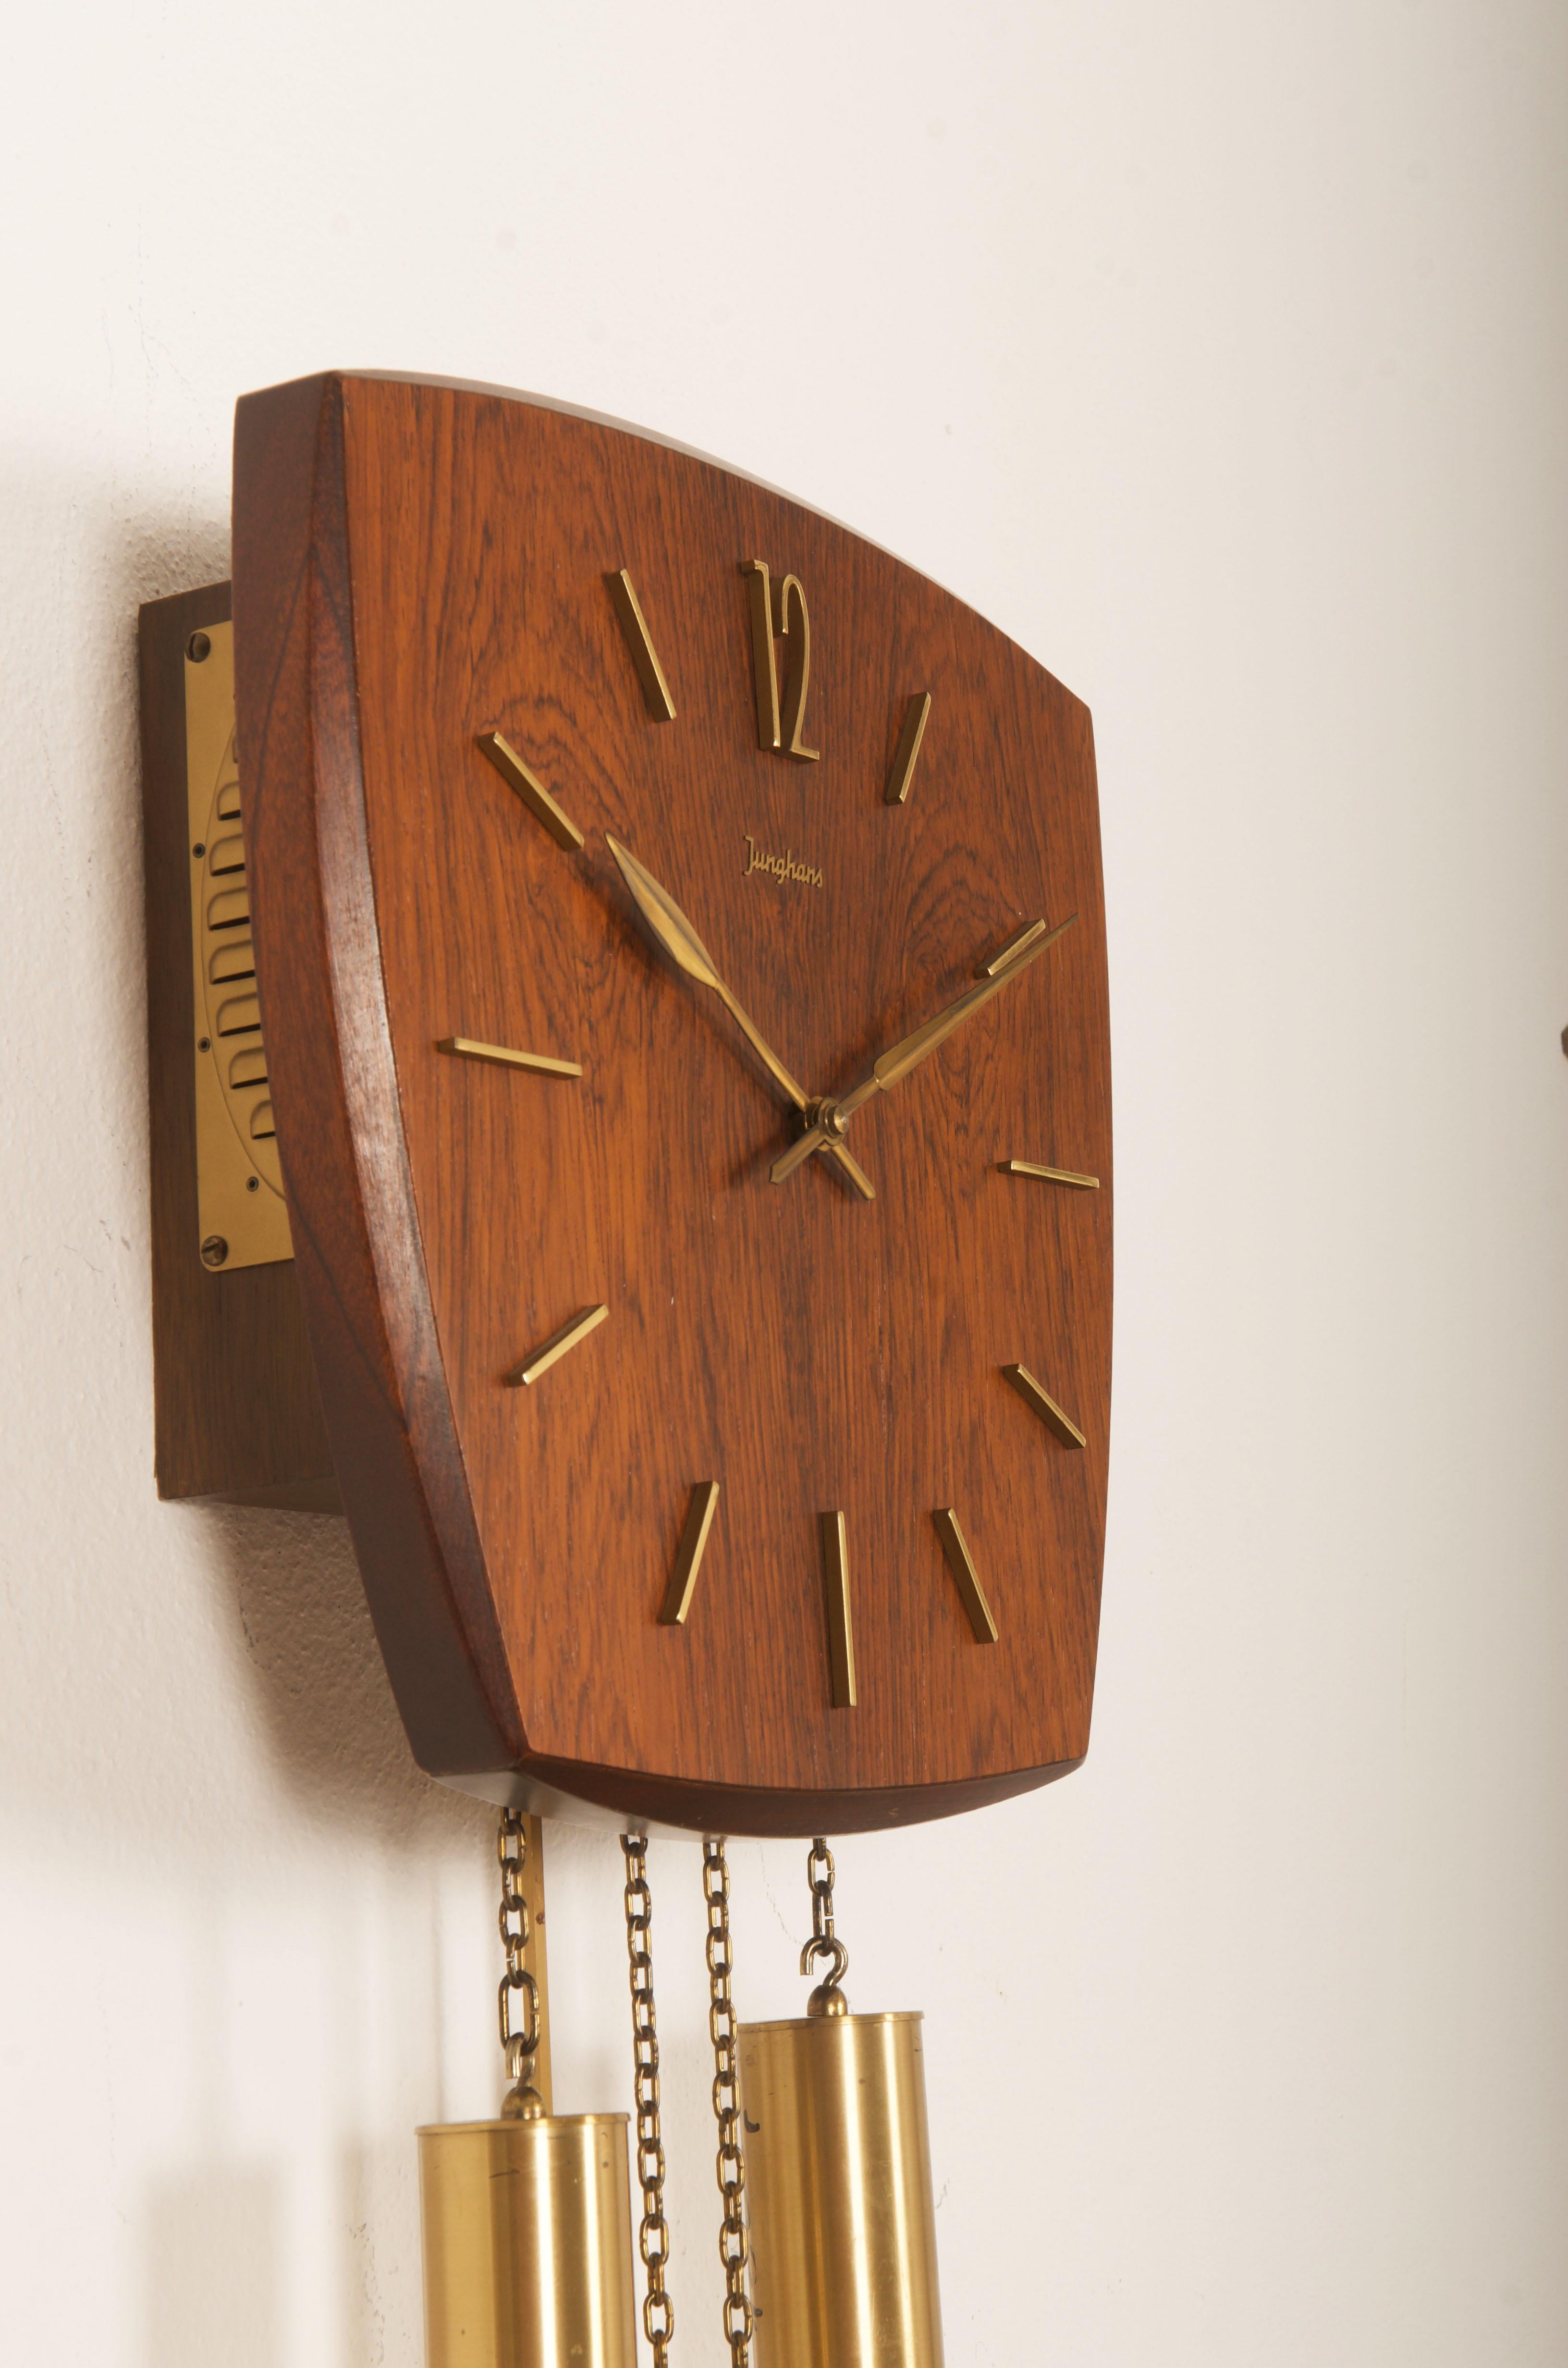 Junghans Hardwood Wall Clock In Good Condition For Sale In Vienna, AT